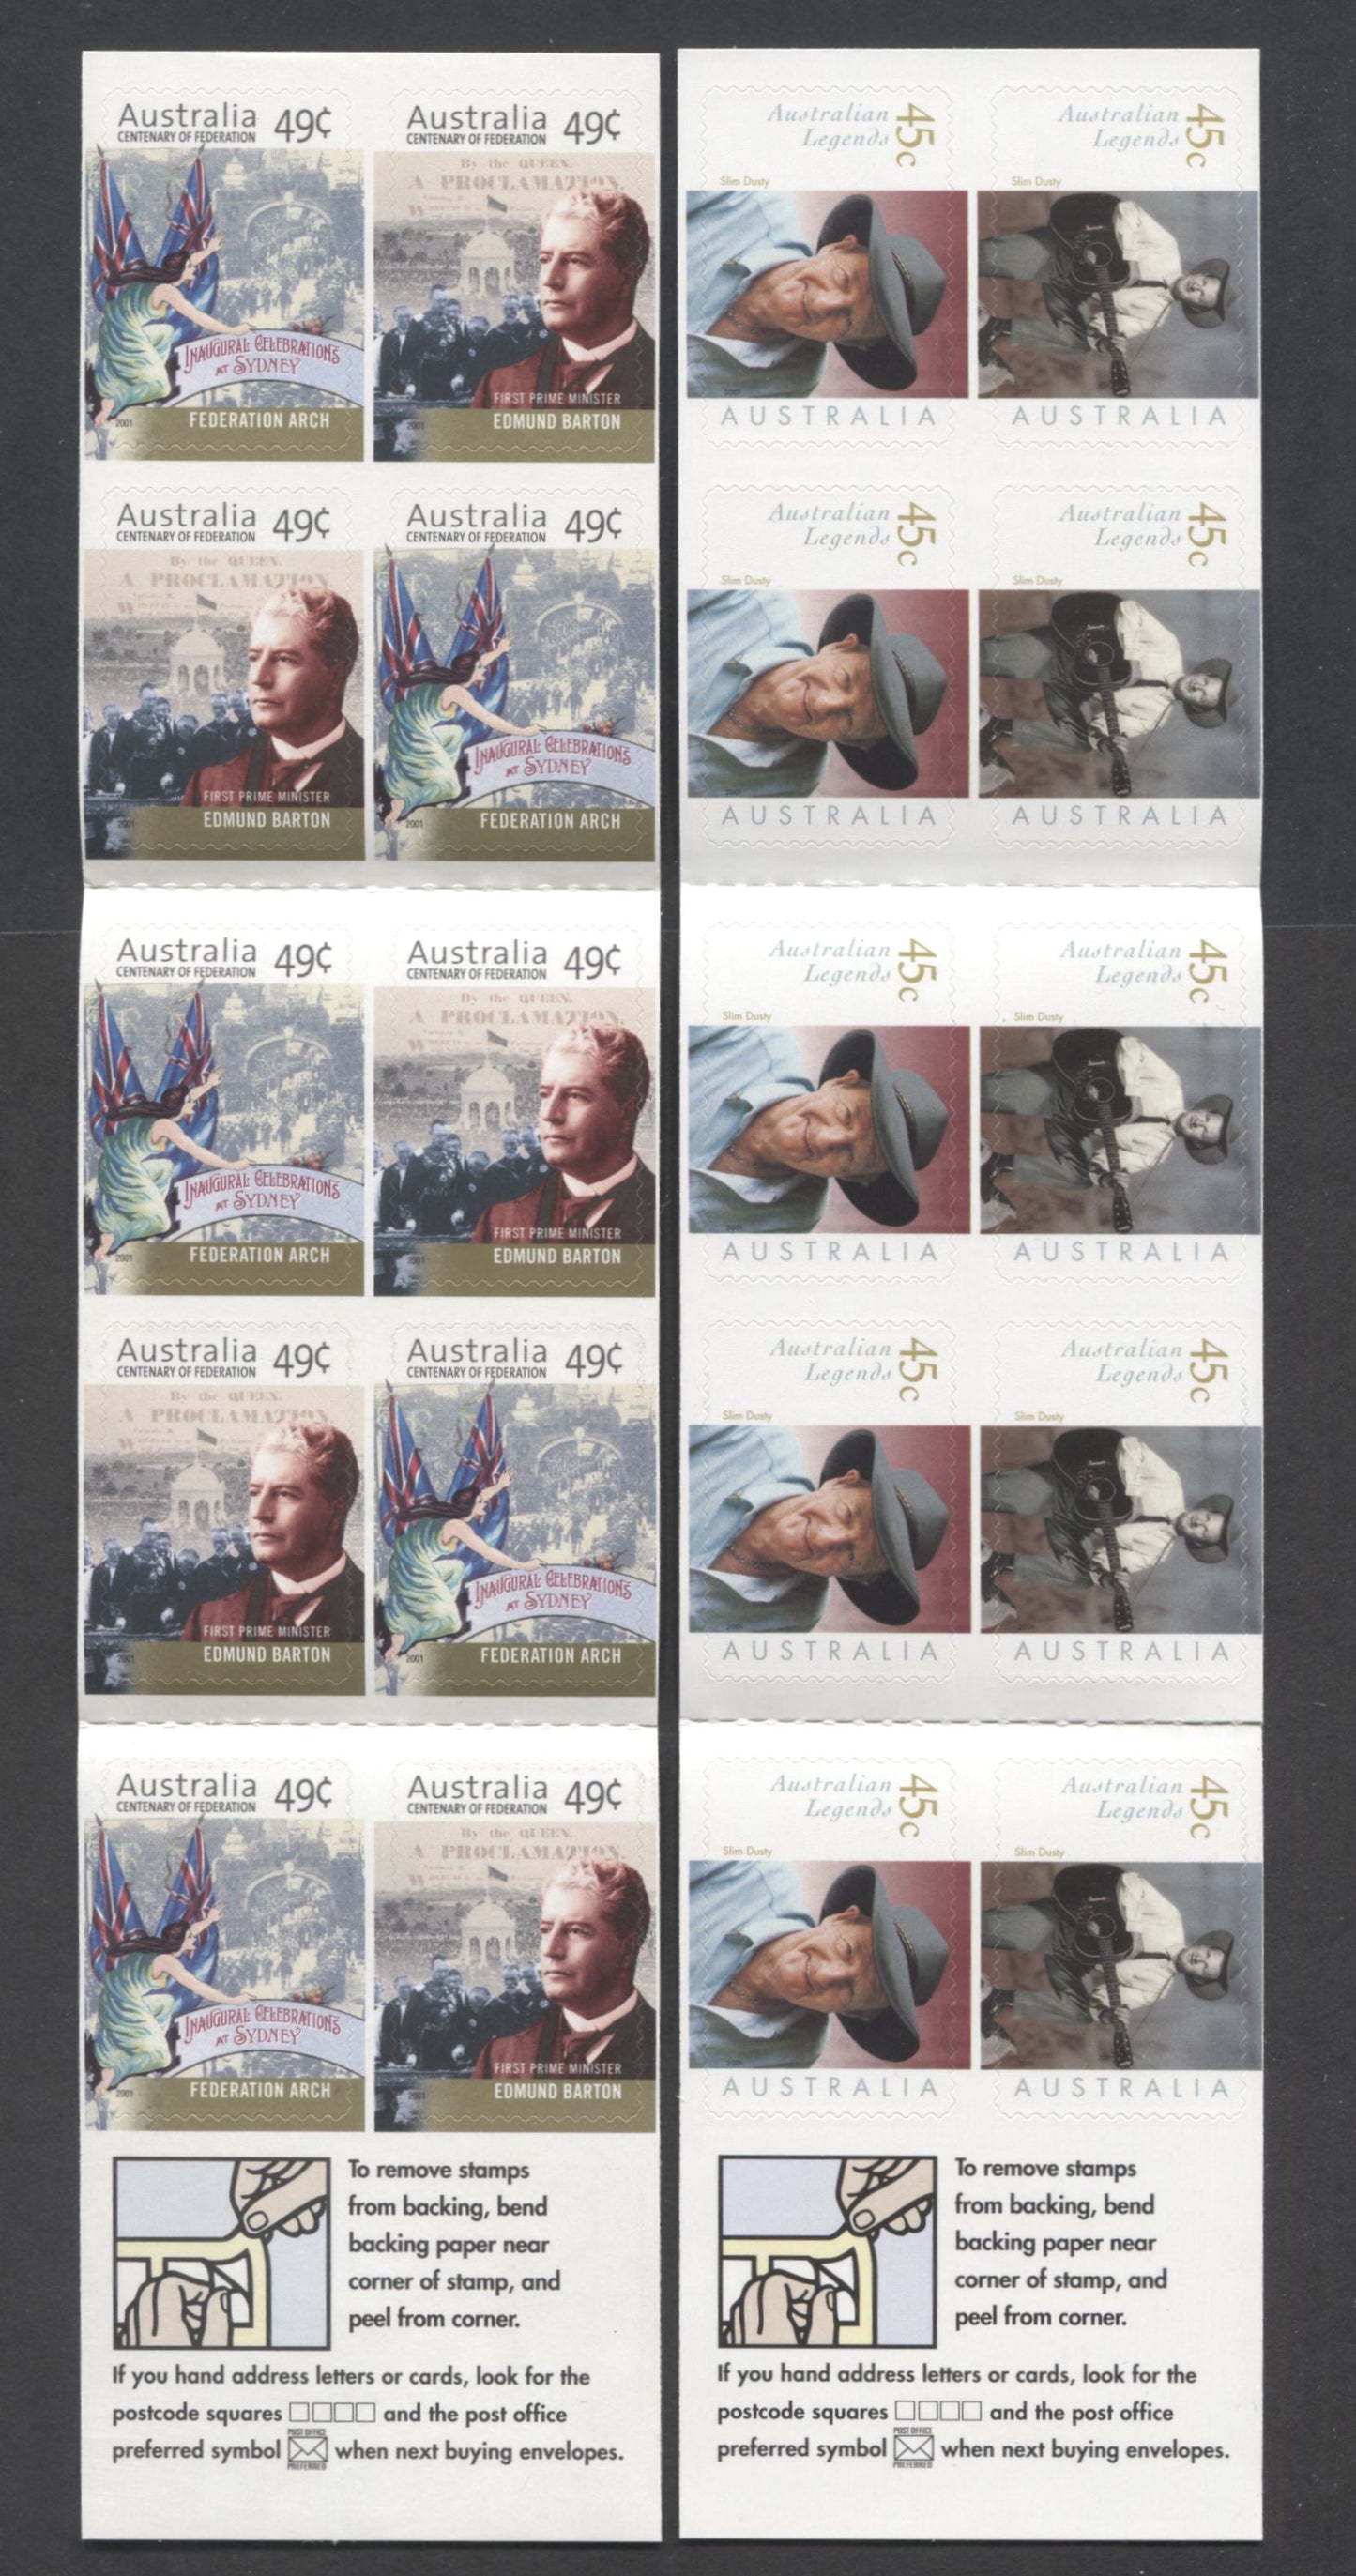 Lot 69 Australia SC#1932a/1936a 2001 Federation Of Australia Centenary & Australian Legends Issues, 2 VFNH Booklets Of 10, Click on Listing to See ALL Pictures, 2017 Scott Cat. $20